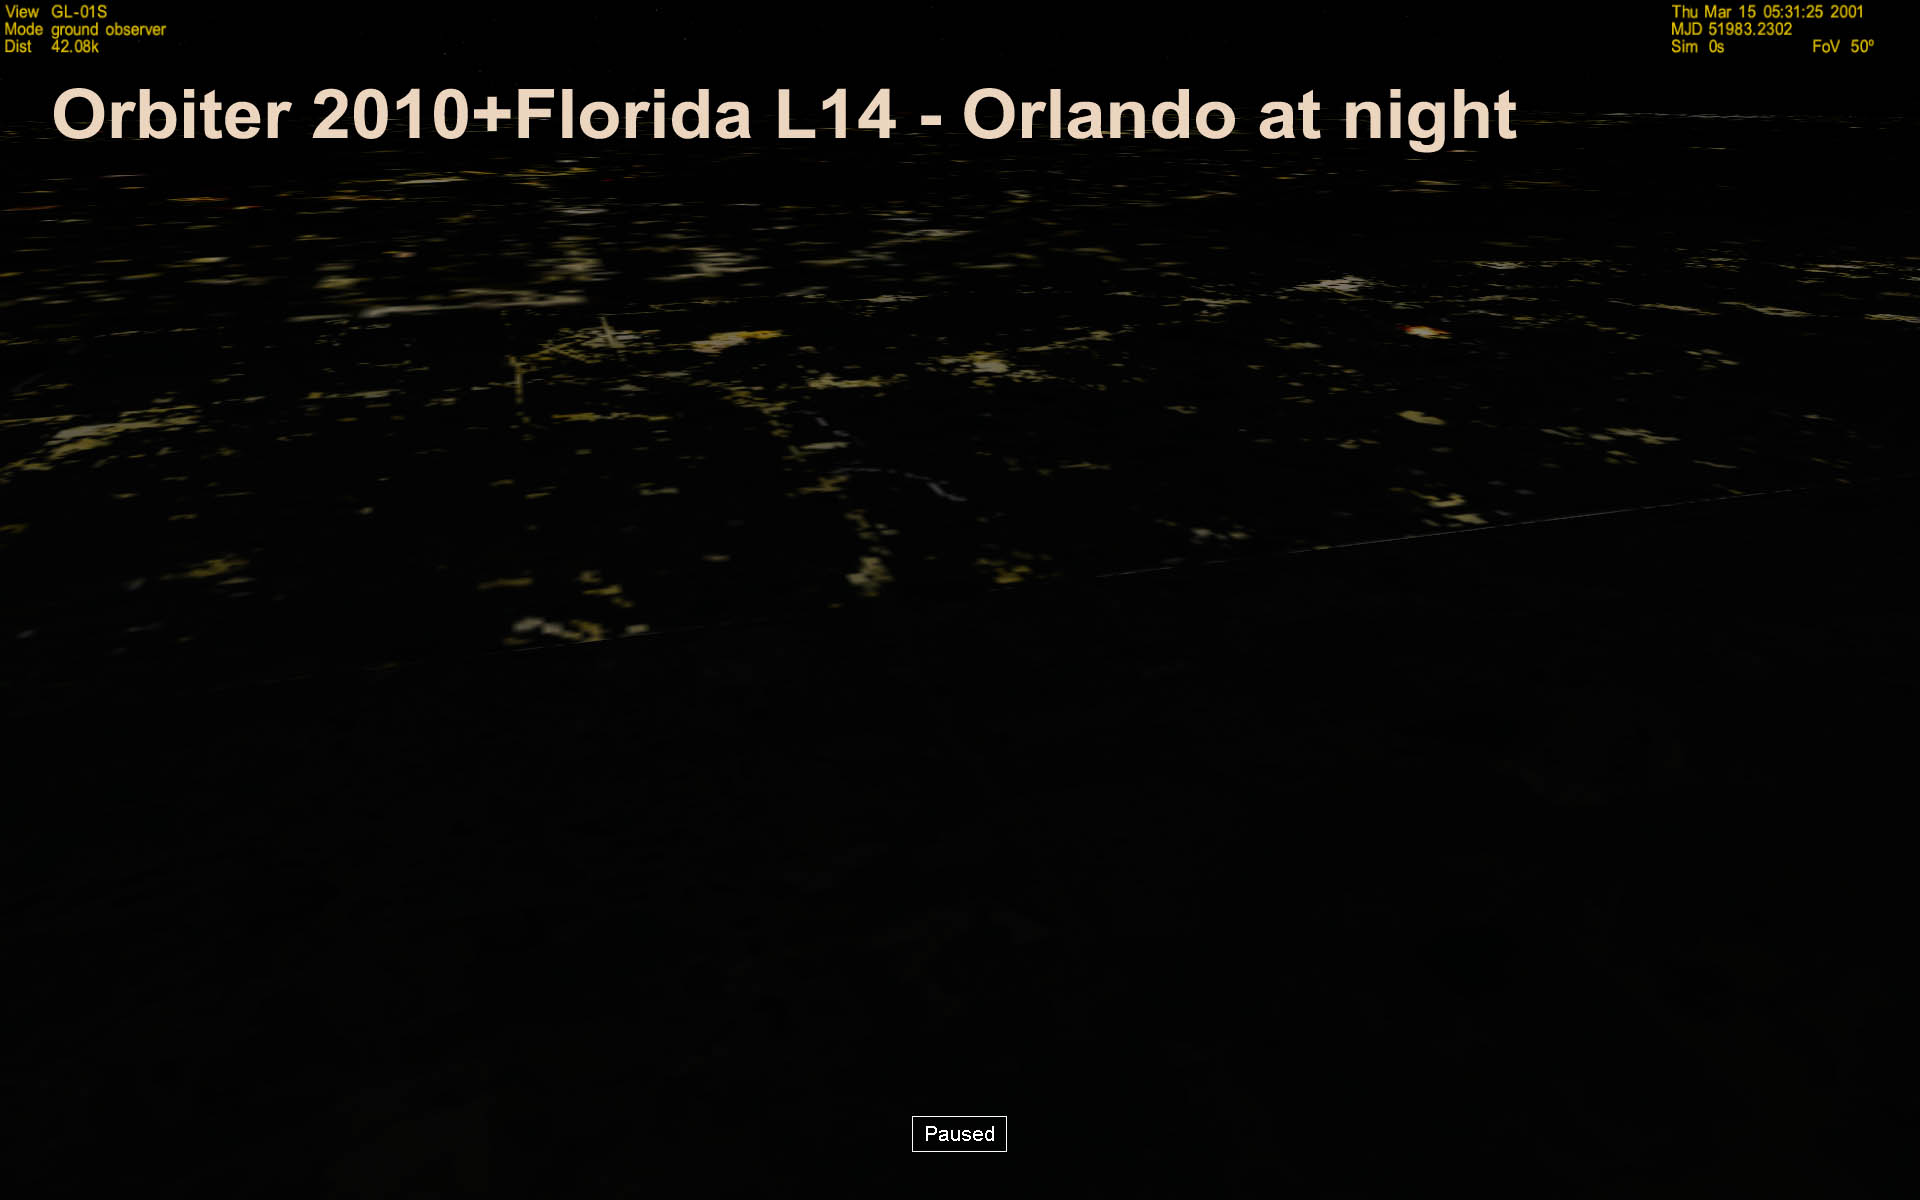 Orlando at night: Orbiter 2010 with level 14 Florida and base tiles (which don't support light maps).